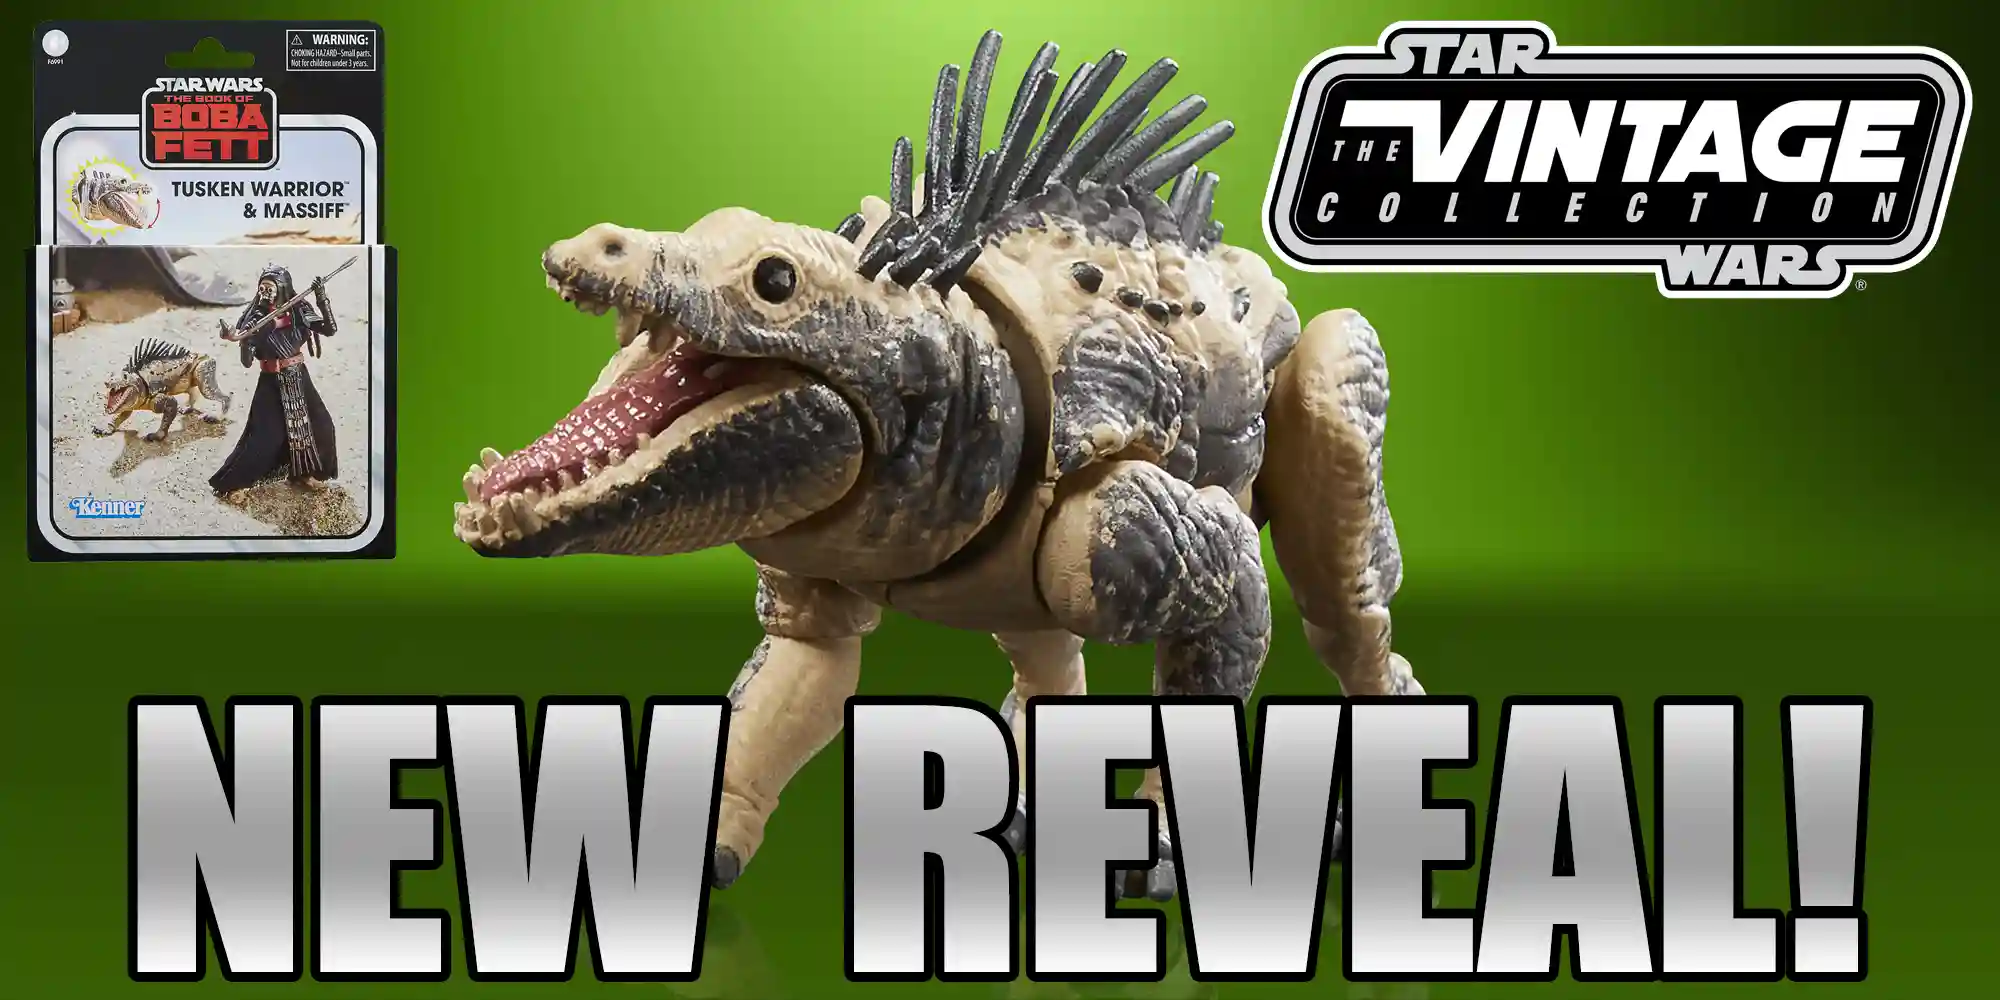 Exclusive Tusken Warrior & Massiff Reveal For TVC! Check It Out!